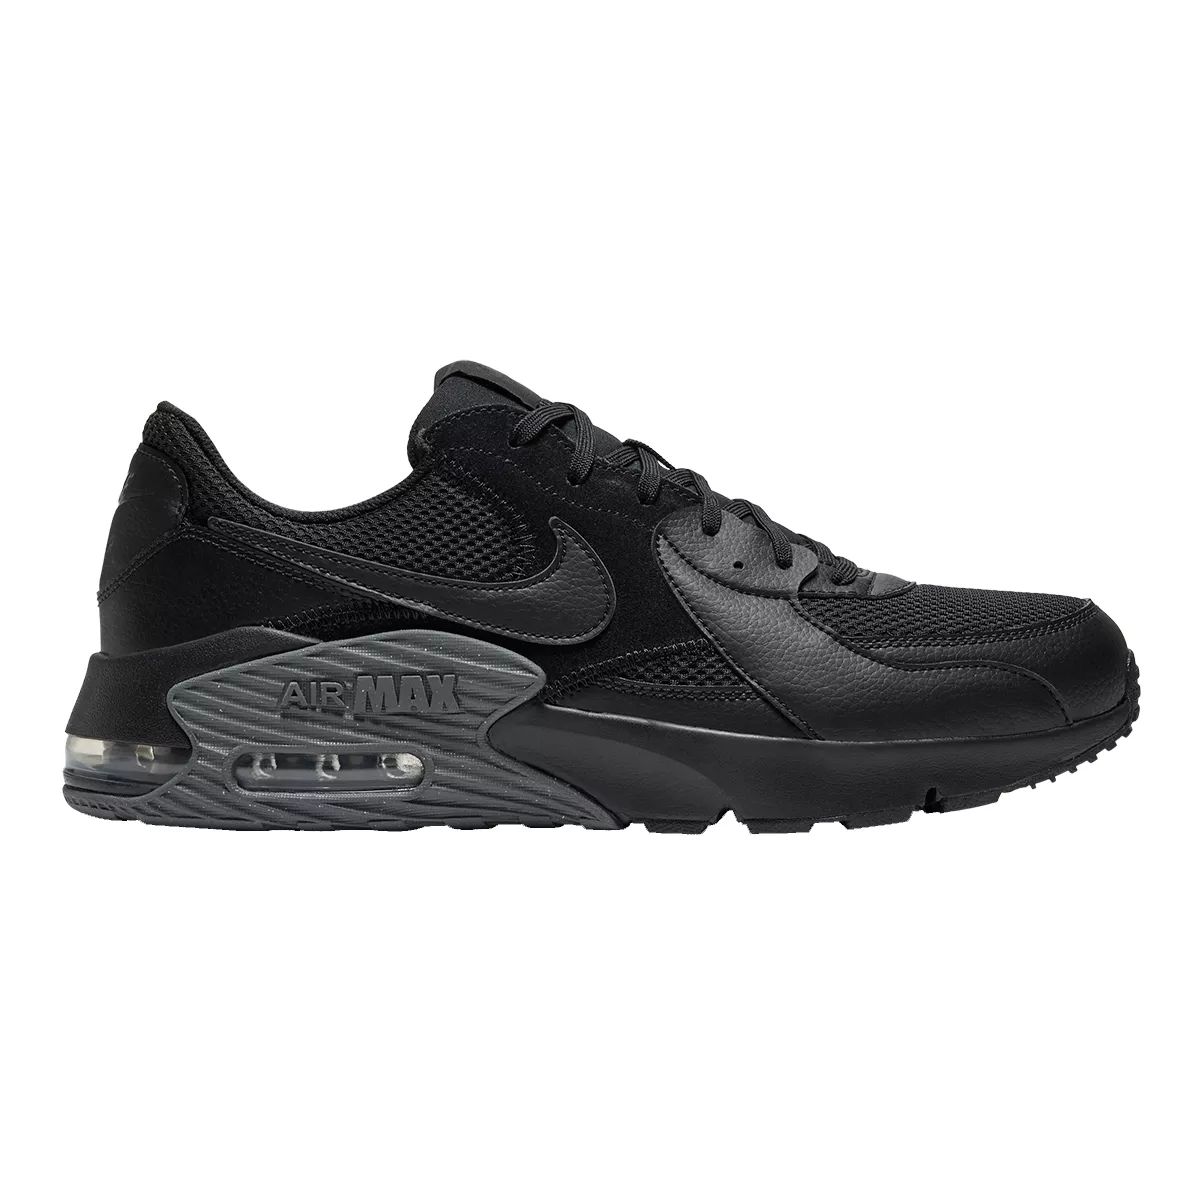 Nike Men's Air Max Excee Shoes Sneakers Cushioned Lightweight